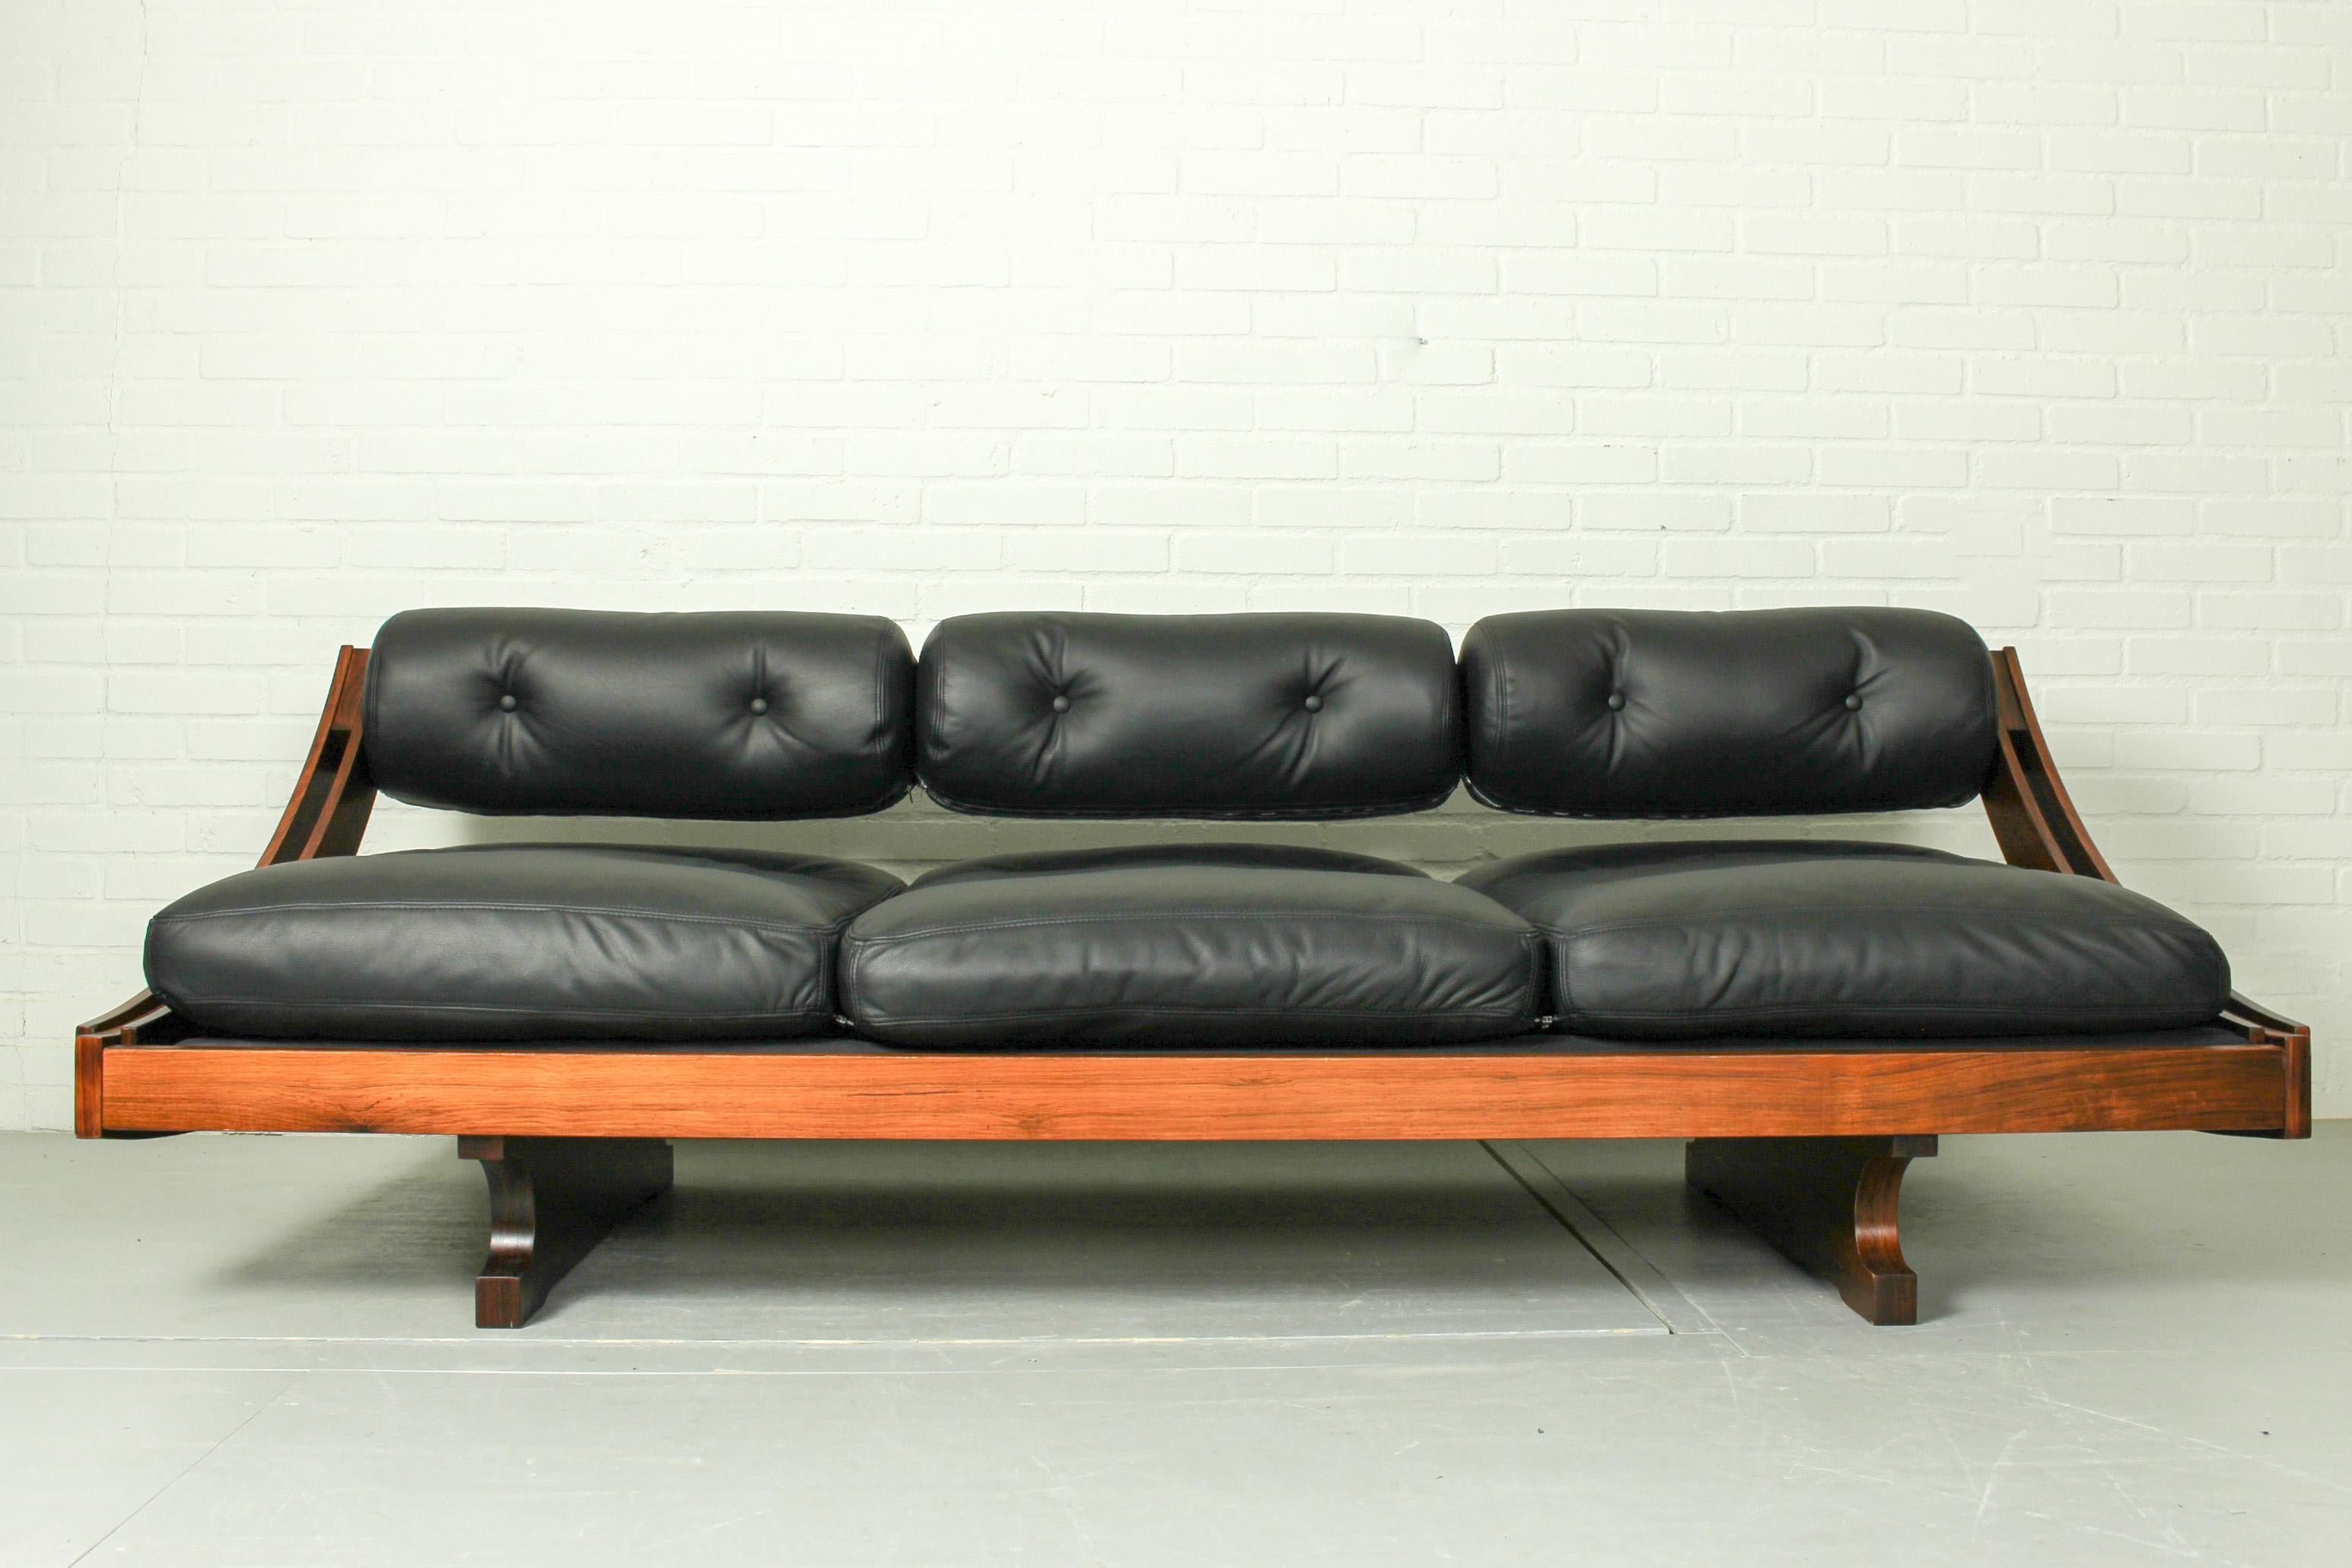 Daybed model GS195 designed by Gianni Songia and produced by Sormani, 1960s. With beautiful rosewood frame and soft cushions with new black leather. Very comfortable and easy to adjust from sofa to daybed by adjusting the backrest. 

Dimensions: